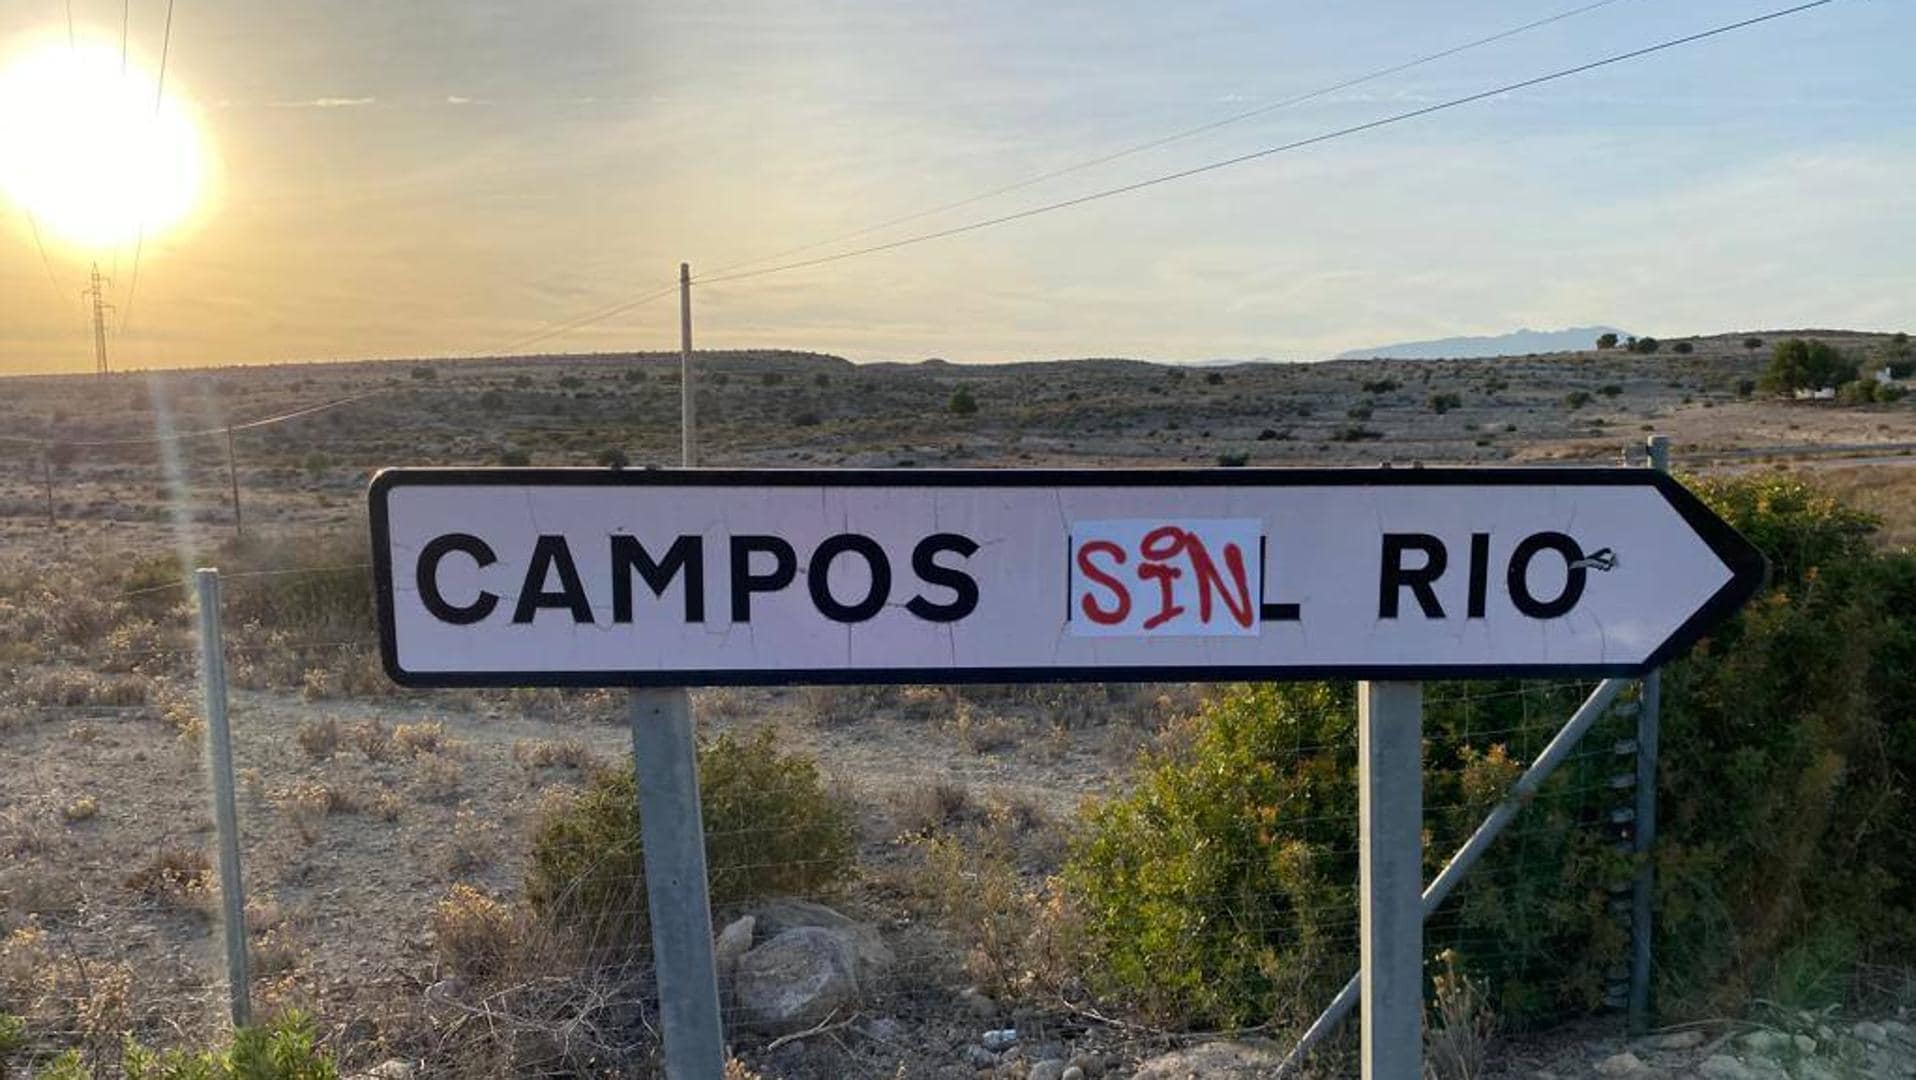 ‘Campos sin Río’ and ‘Ni Fuente Ni Álamo’, the reflection of two towns plagued by drought